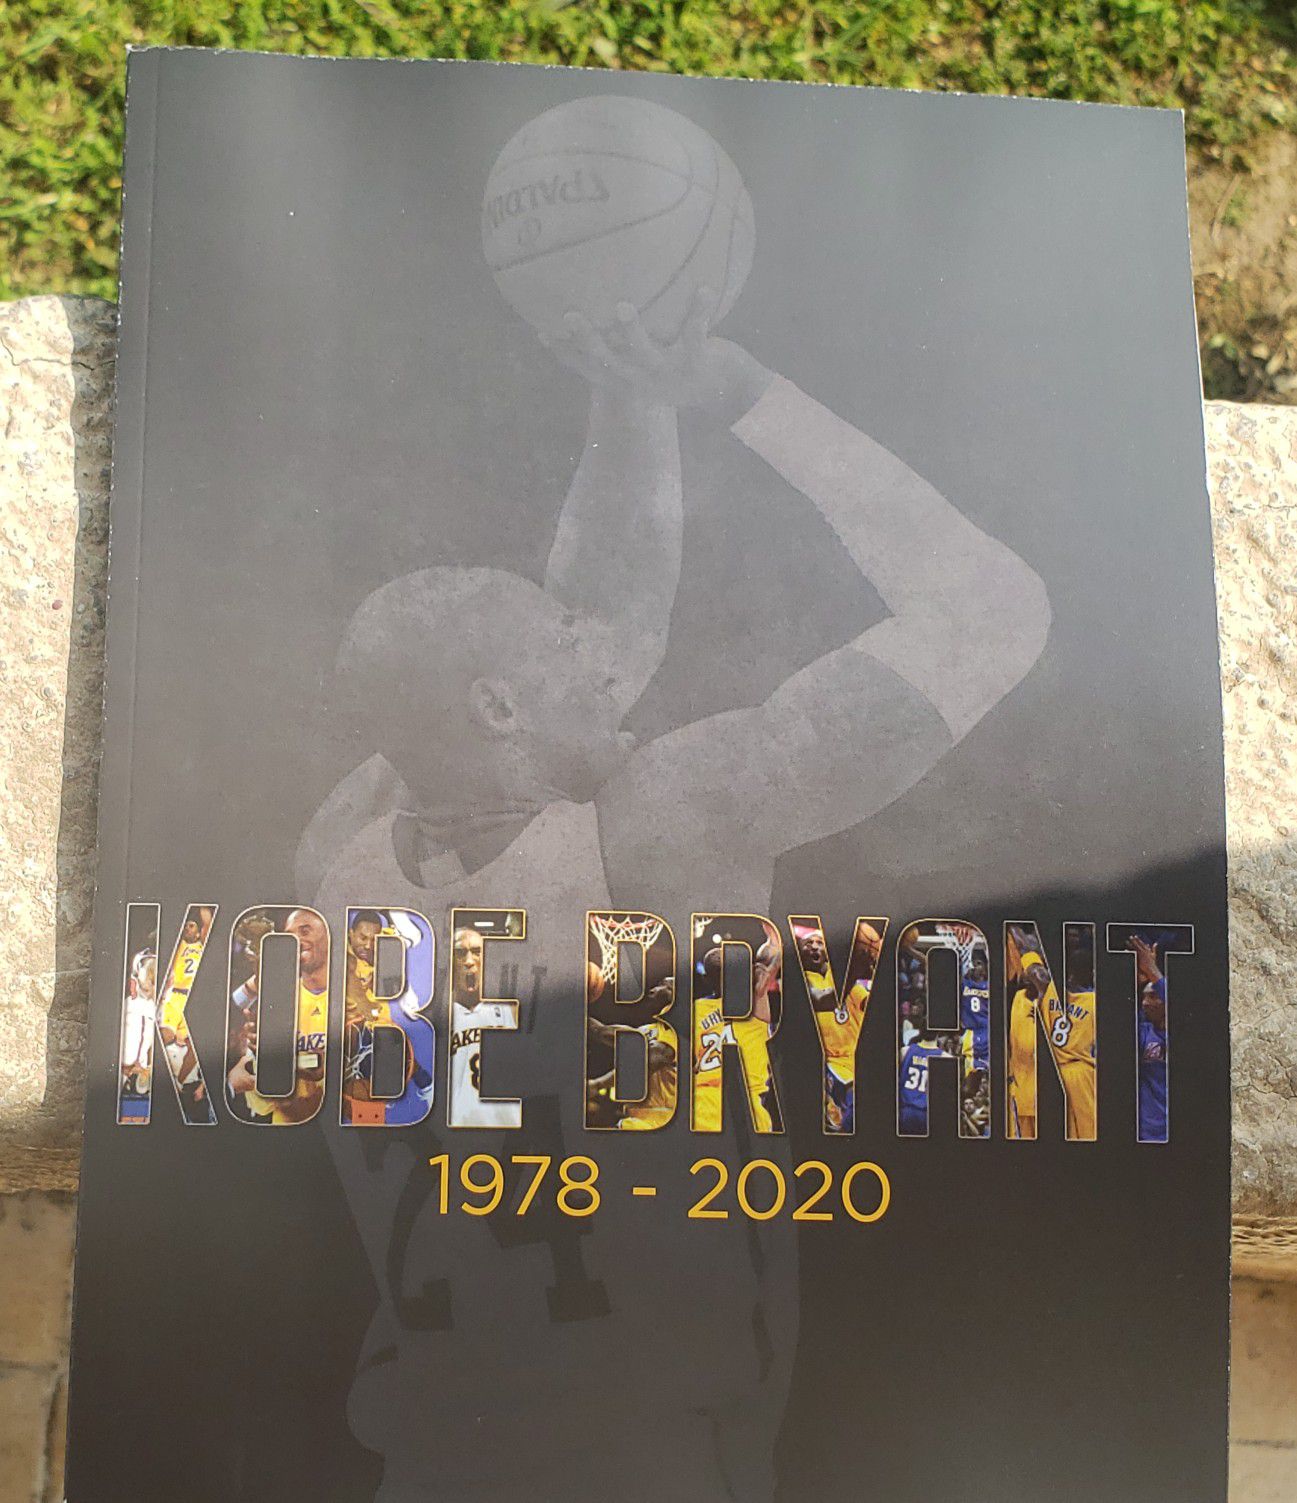 Almost gone The Los Angeles Kobe Bryant 1978 - 2020 LIMITED EDITION